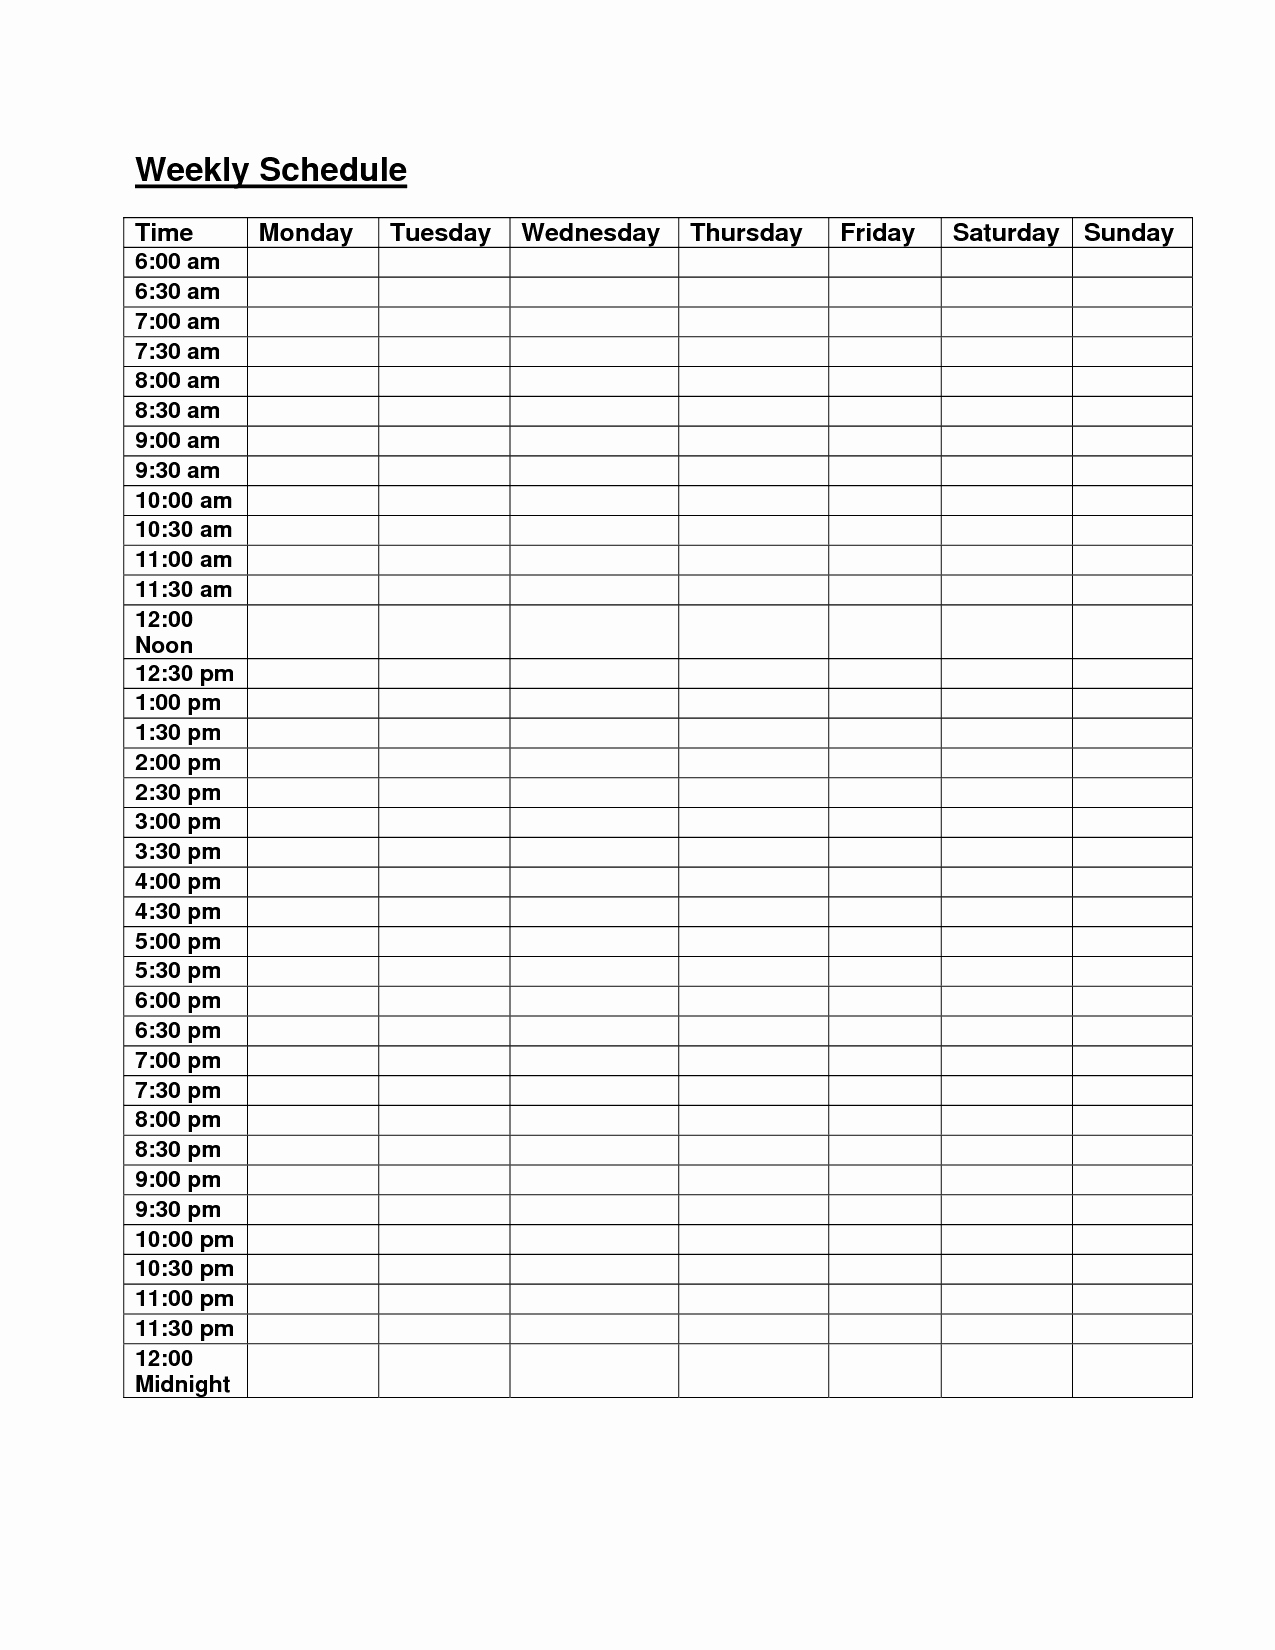 15 Minute Schedule Template Unique Printable Daily Planner with 15 Minute Intervals